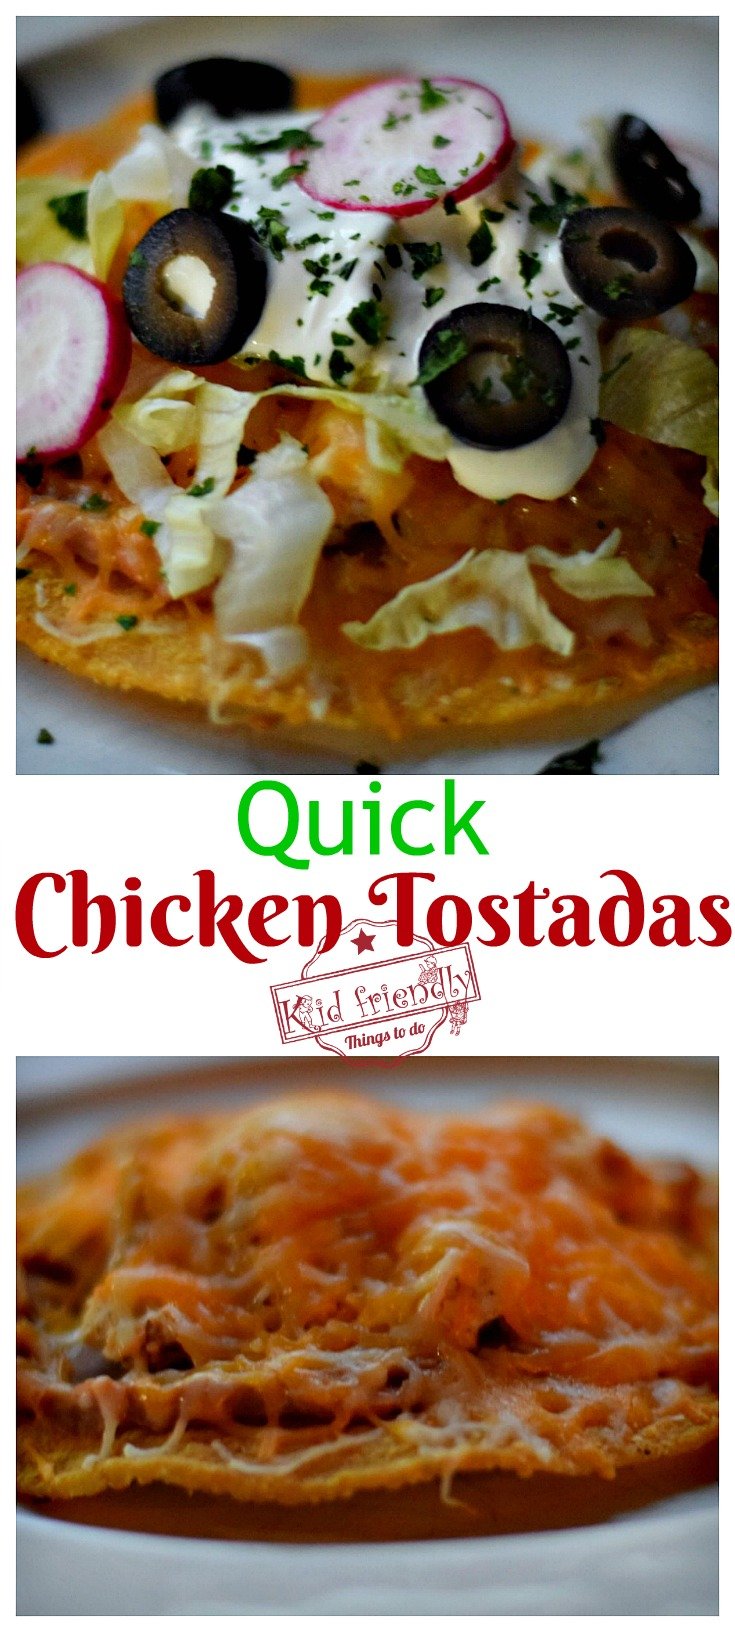 Quick Chicken Tostadas - Easy Mexican Food Recipe - Simple and absolutely delicious recipe for busy nights with the family! www.kidfriendlythingstodo.com